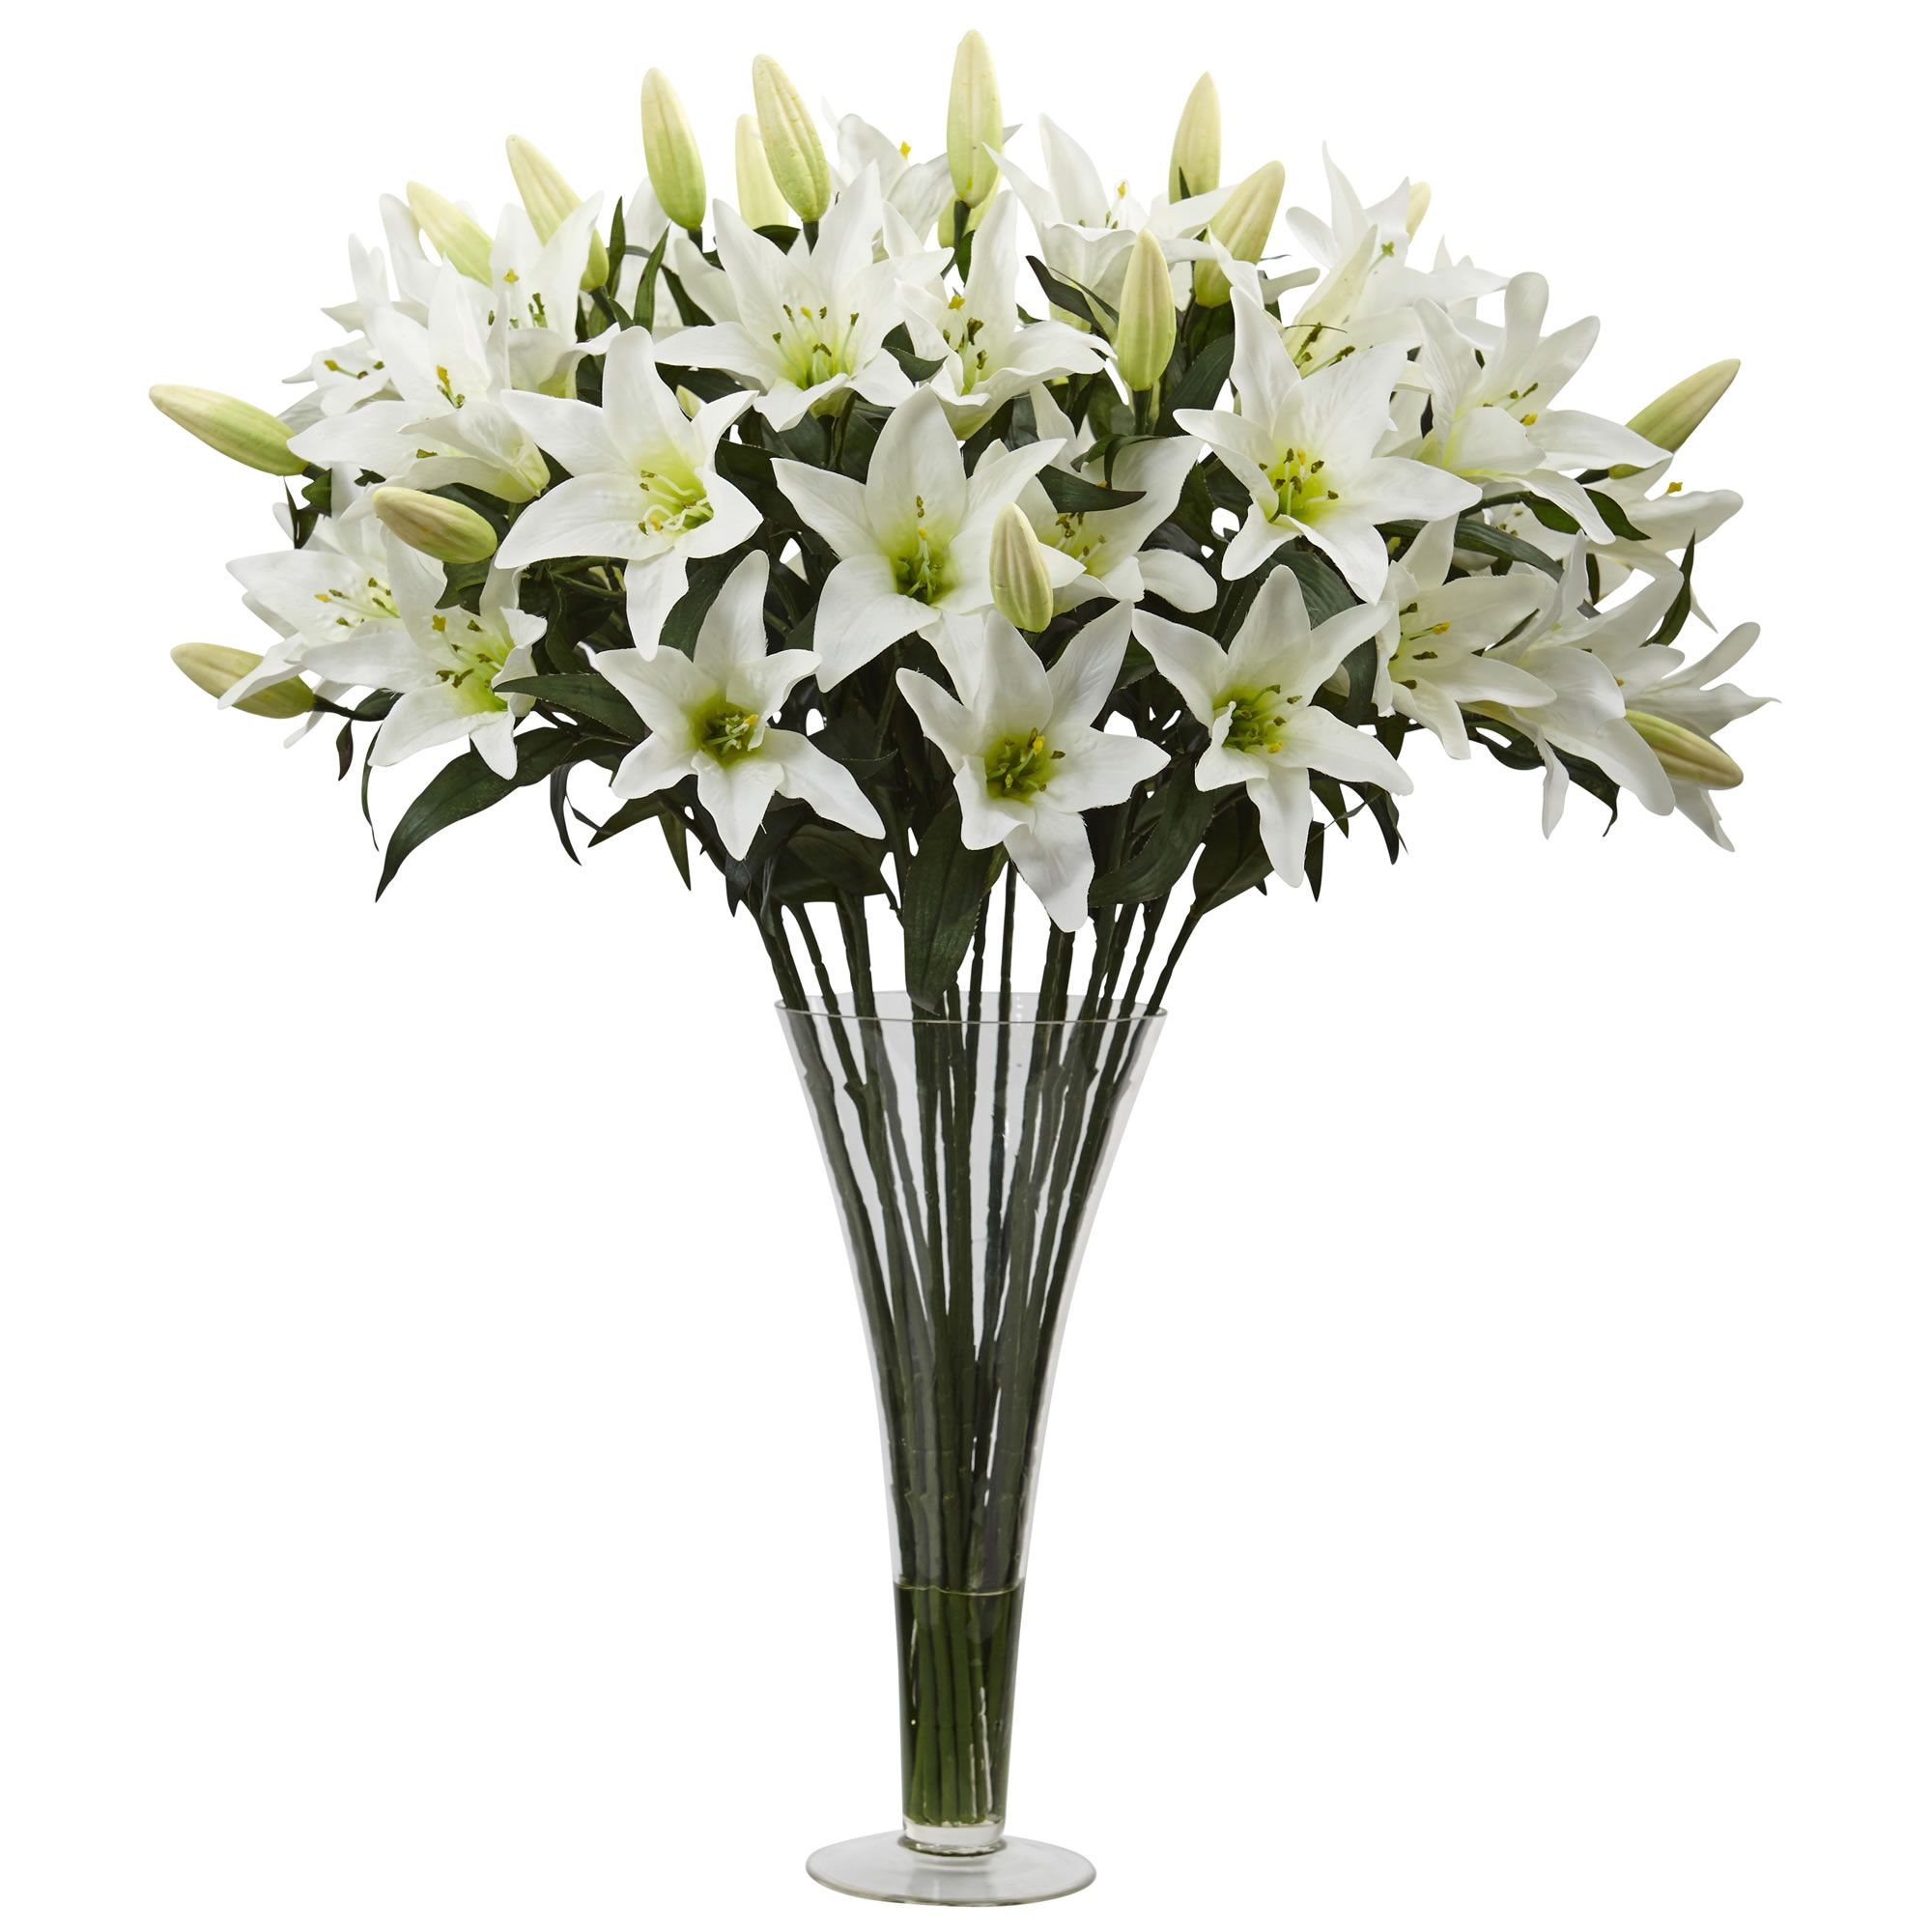 28 Lovable Artificial Branches for Vases 2024 free download artificial branches for vases of lily arrangement with flared vase nearly natural this mix of regarding lily arrangement with flared vase nearly natural this mix of white lily blossoms and b